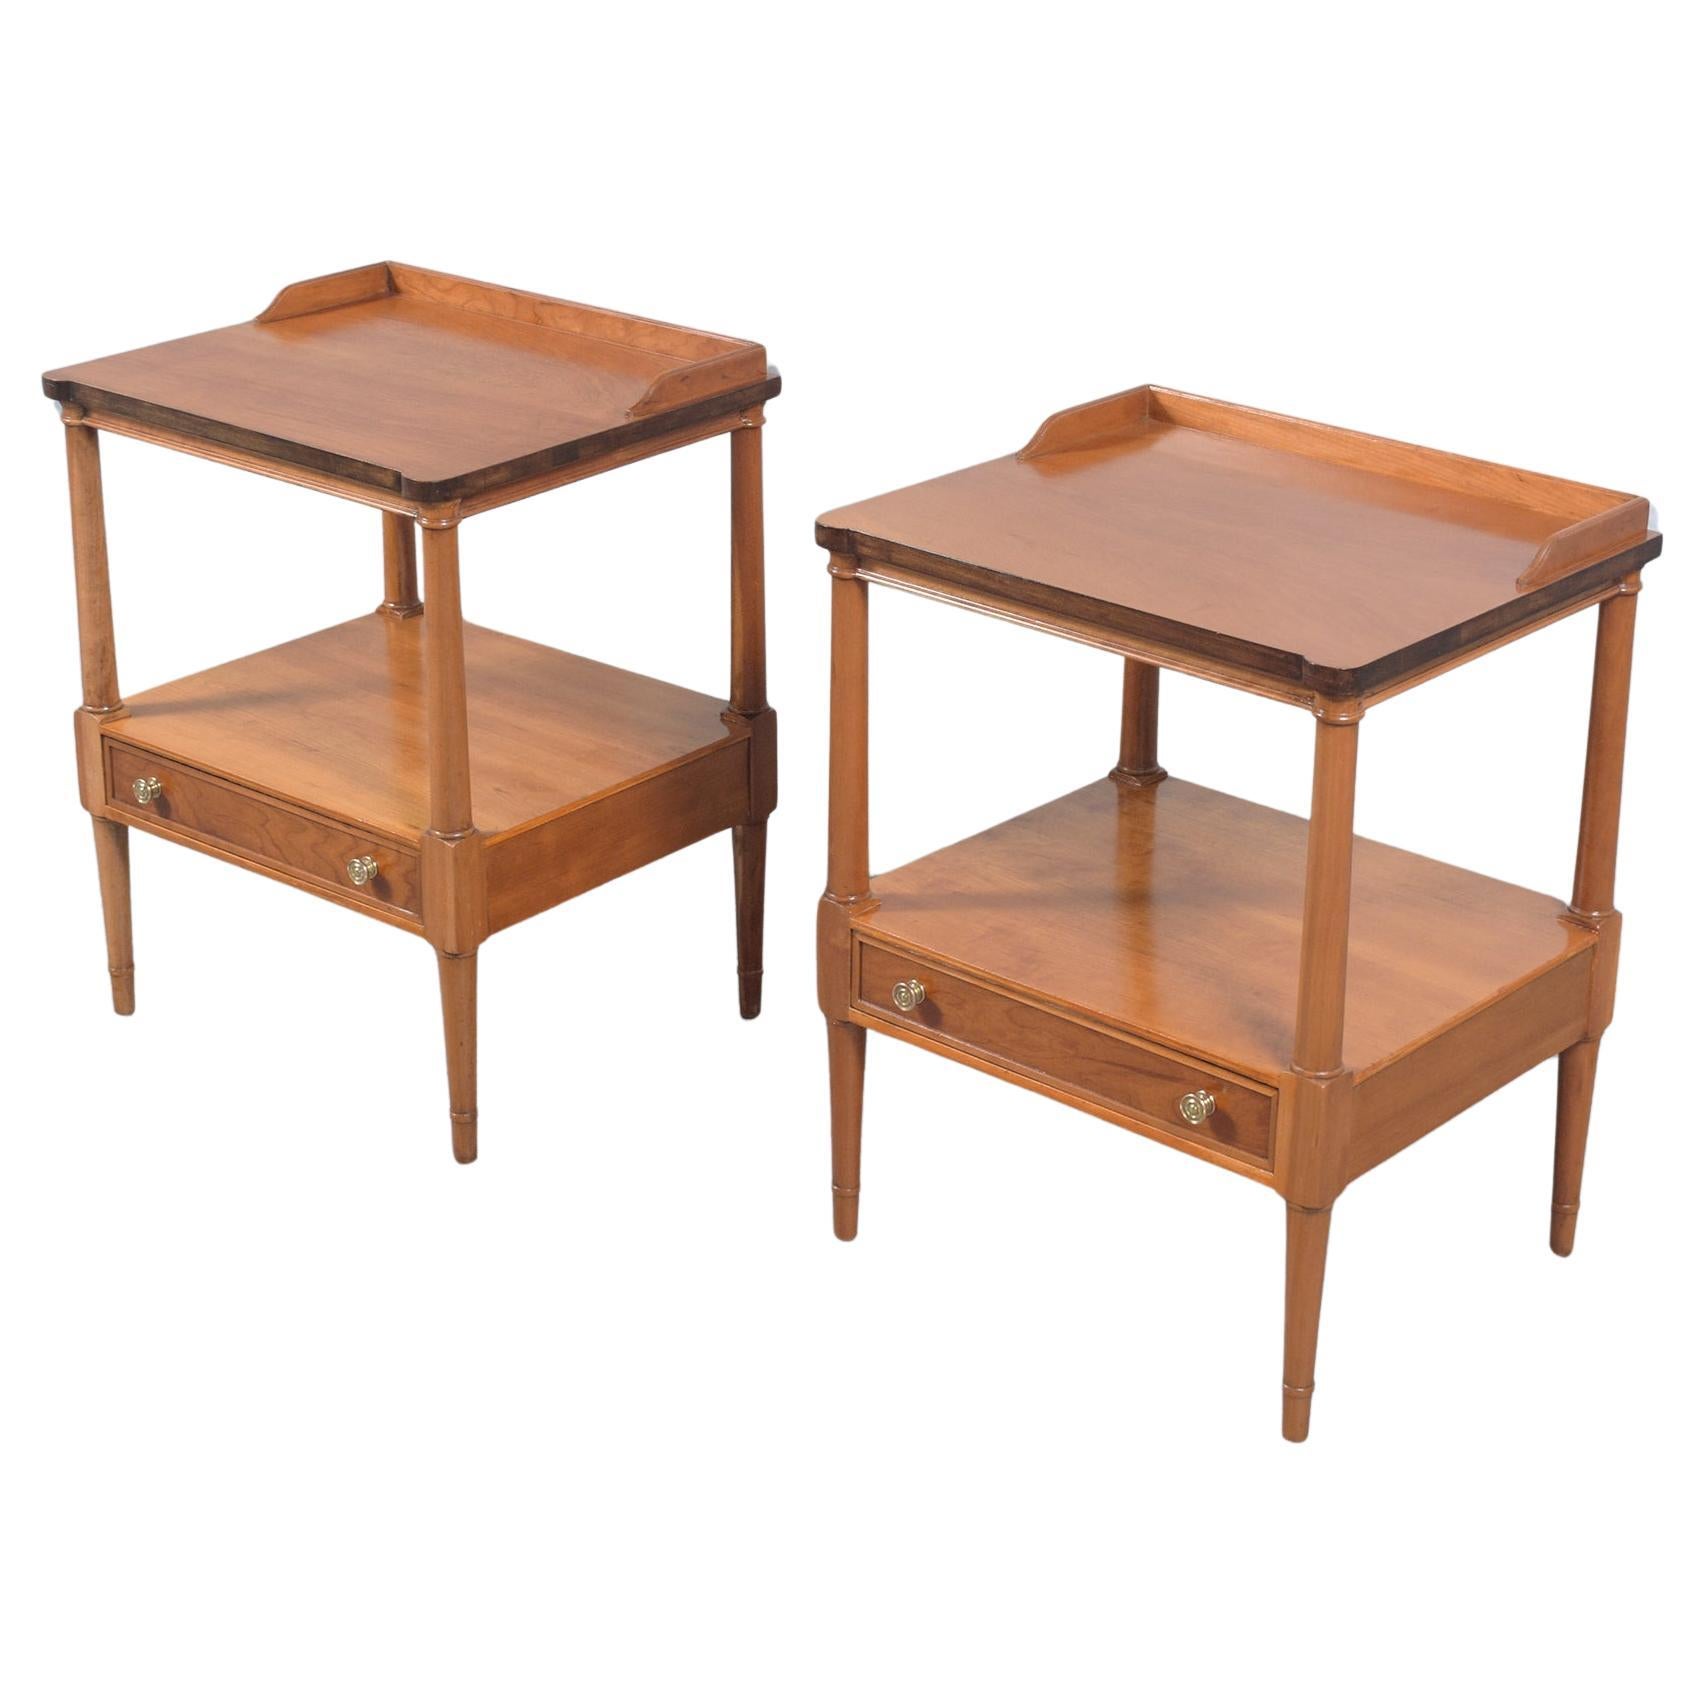 Elegant Handcrafted Maple Bedside Tables with Brass Handles and Tapered Legs For Sale